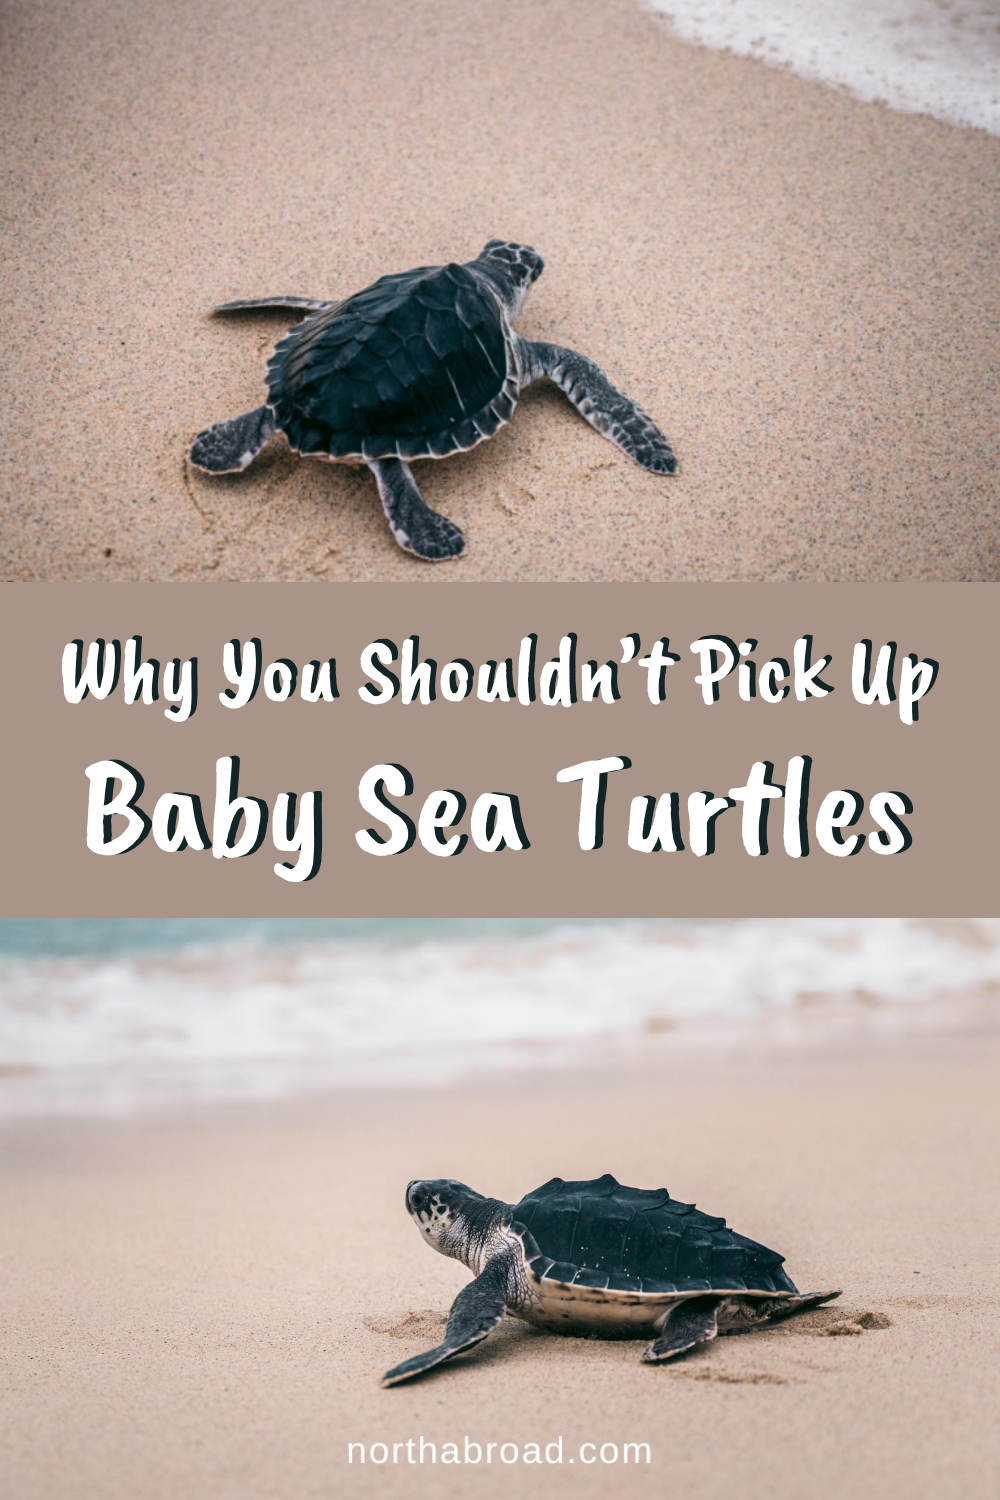 Why You Shouldn’t Pick Up Baby Sea Turtles